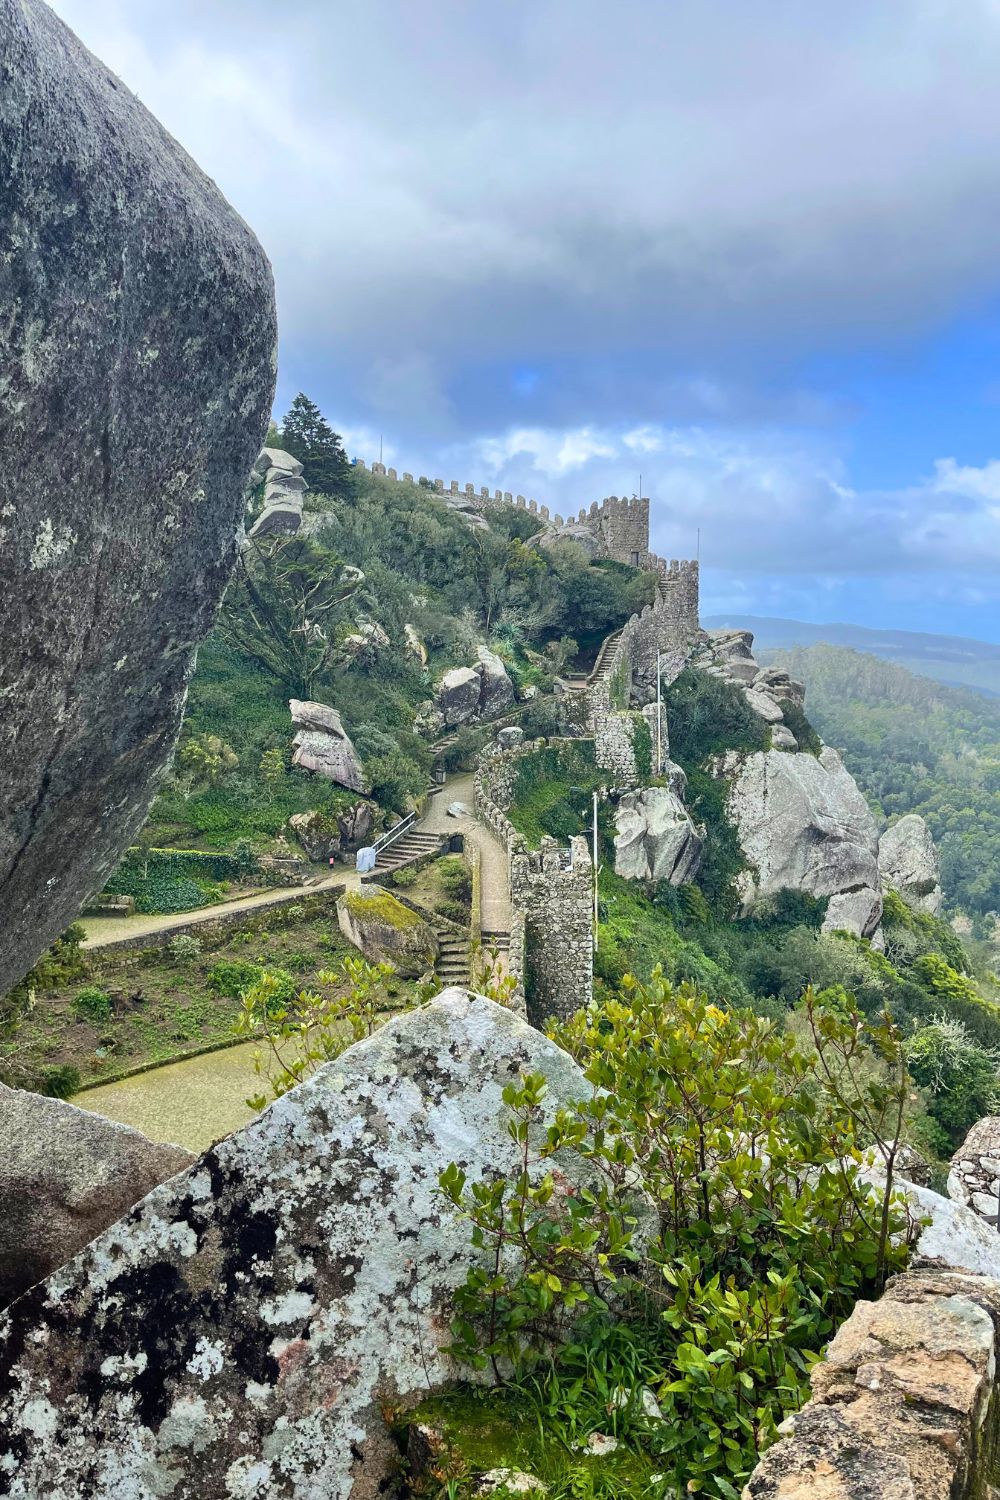 A view of the ancient stone walls and winding staircases of the Moors Castle in Sintra, Portugal, nestled among large boulders and green vegetation, with a hazy sky above and a distant view of the countryside.